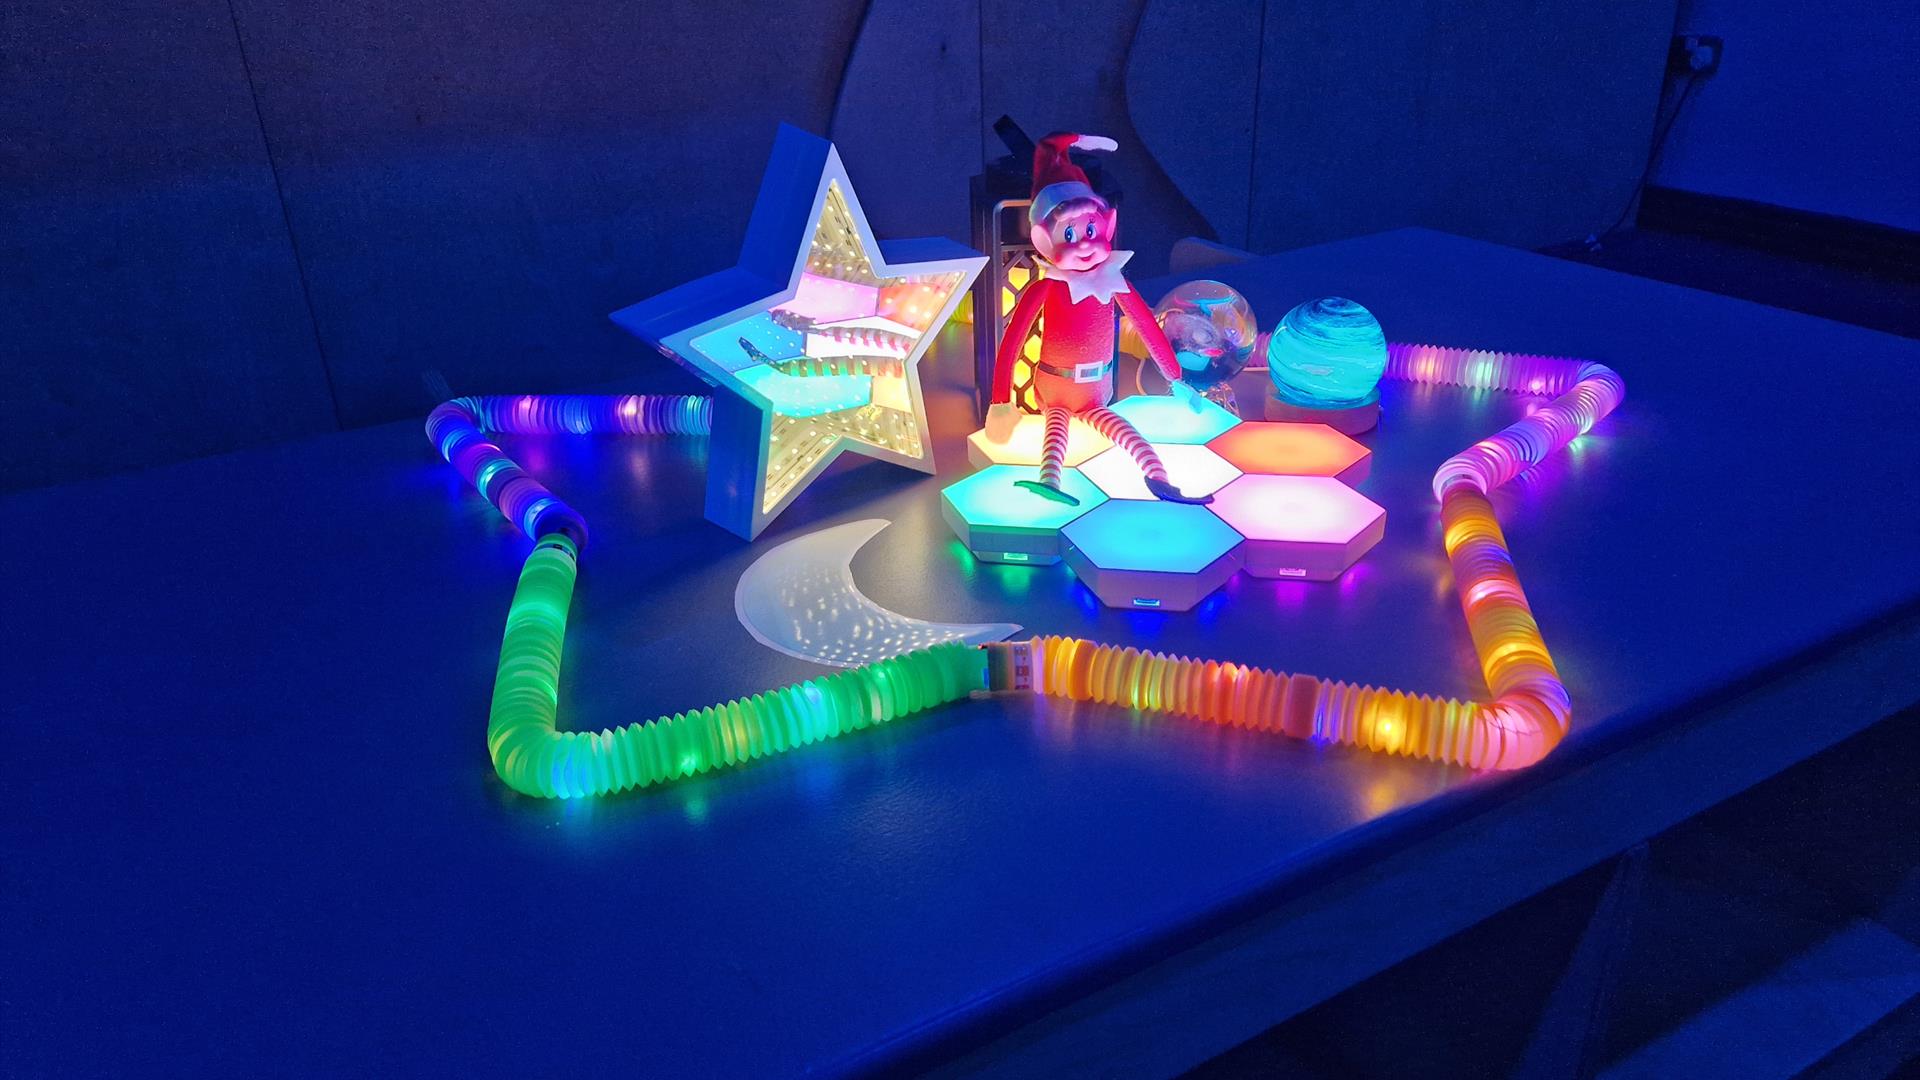 A sensory room with fun interactive trail with Christmas elves and fun stations